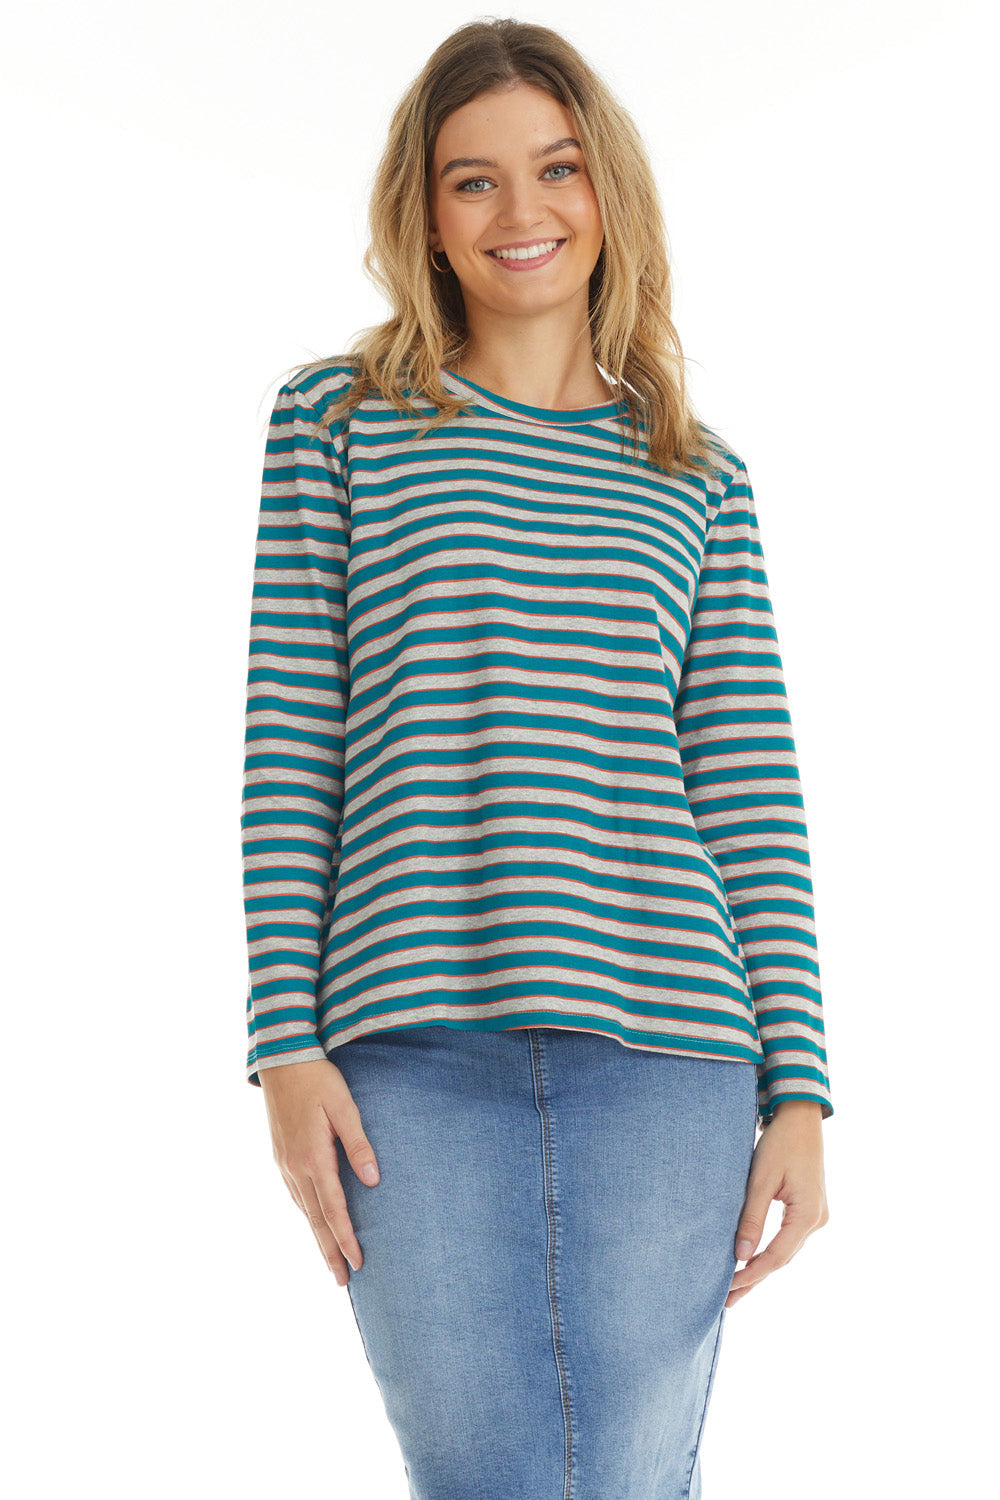 Grey and Teal Striped Long Sleeve Cotton T-shirt Top for Women B468'